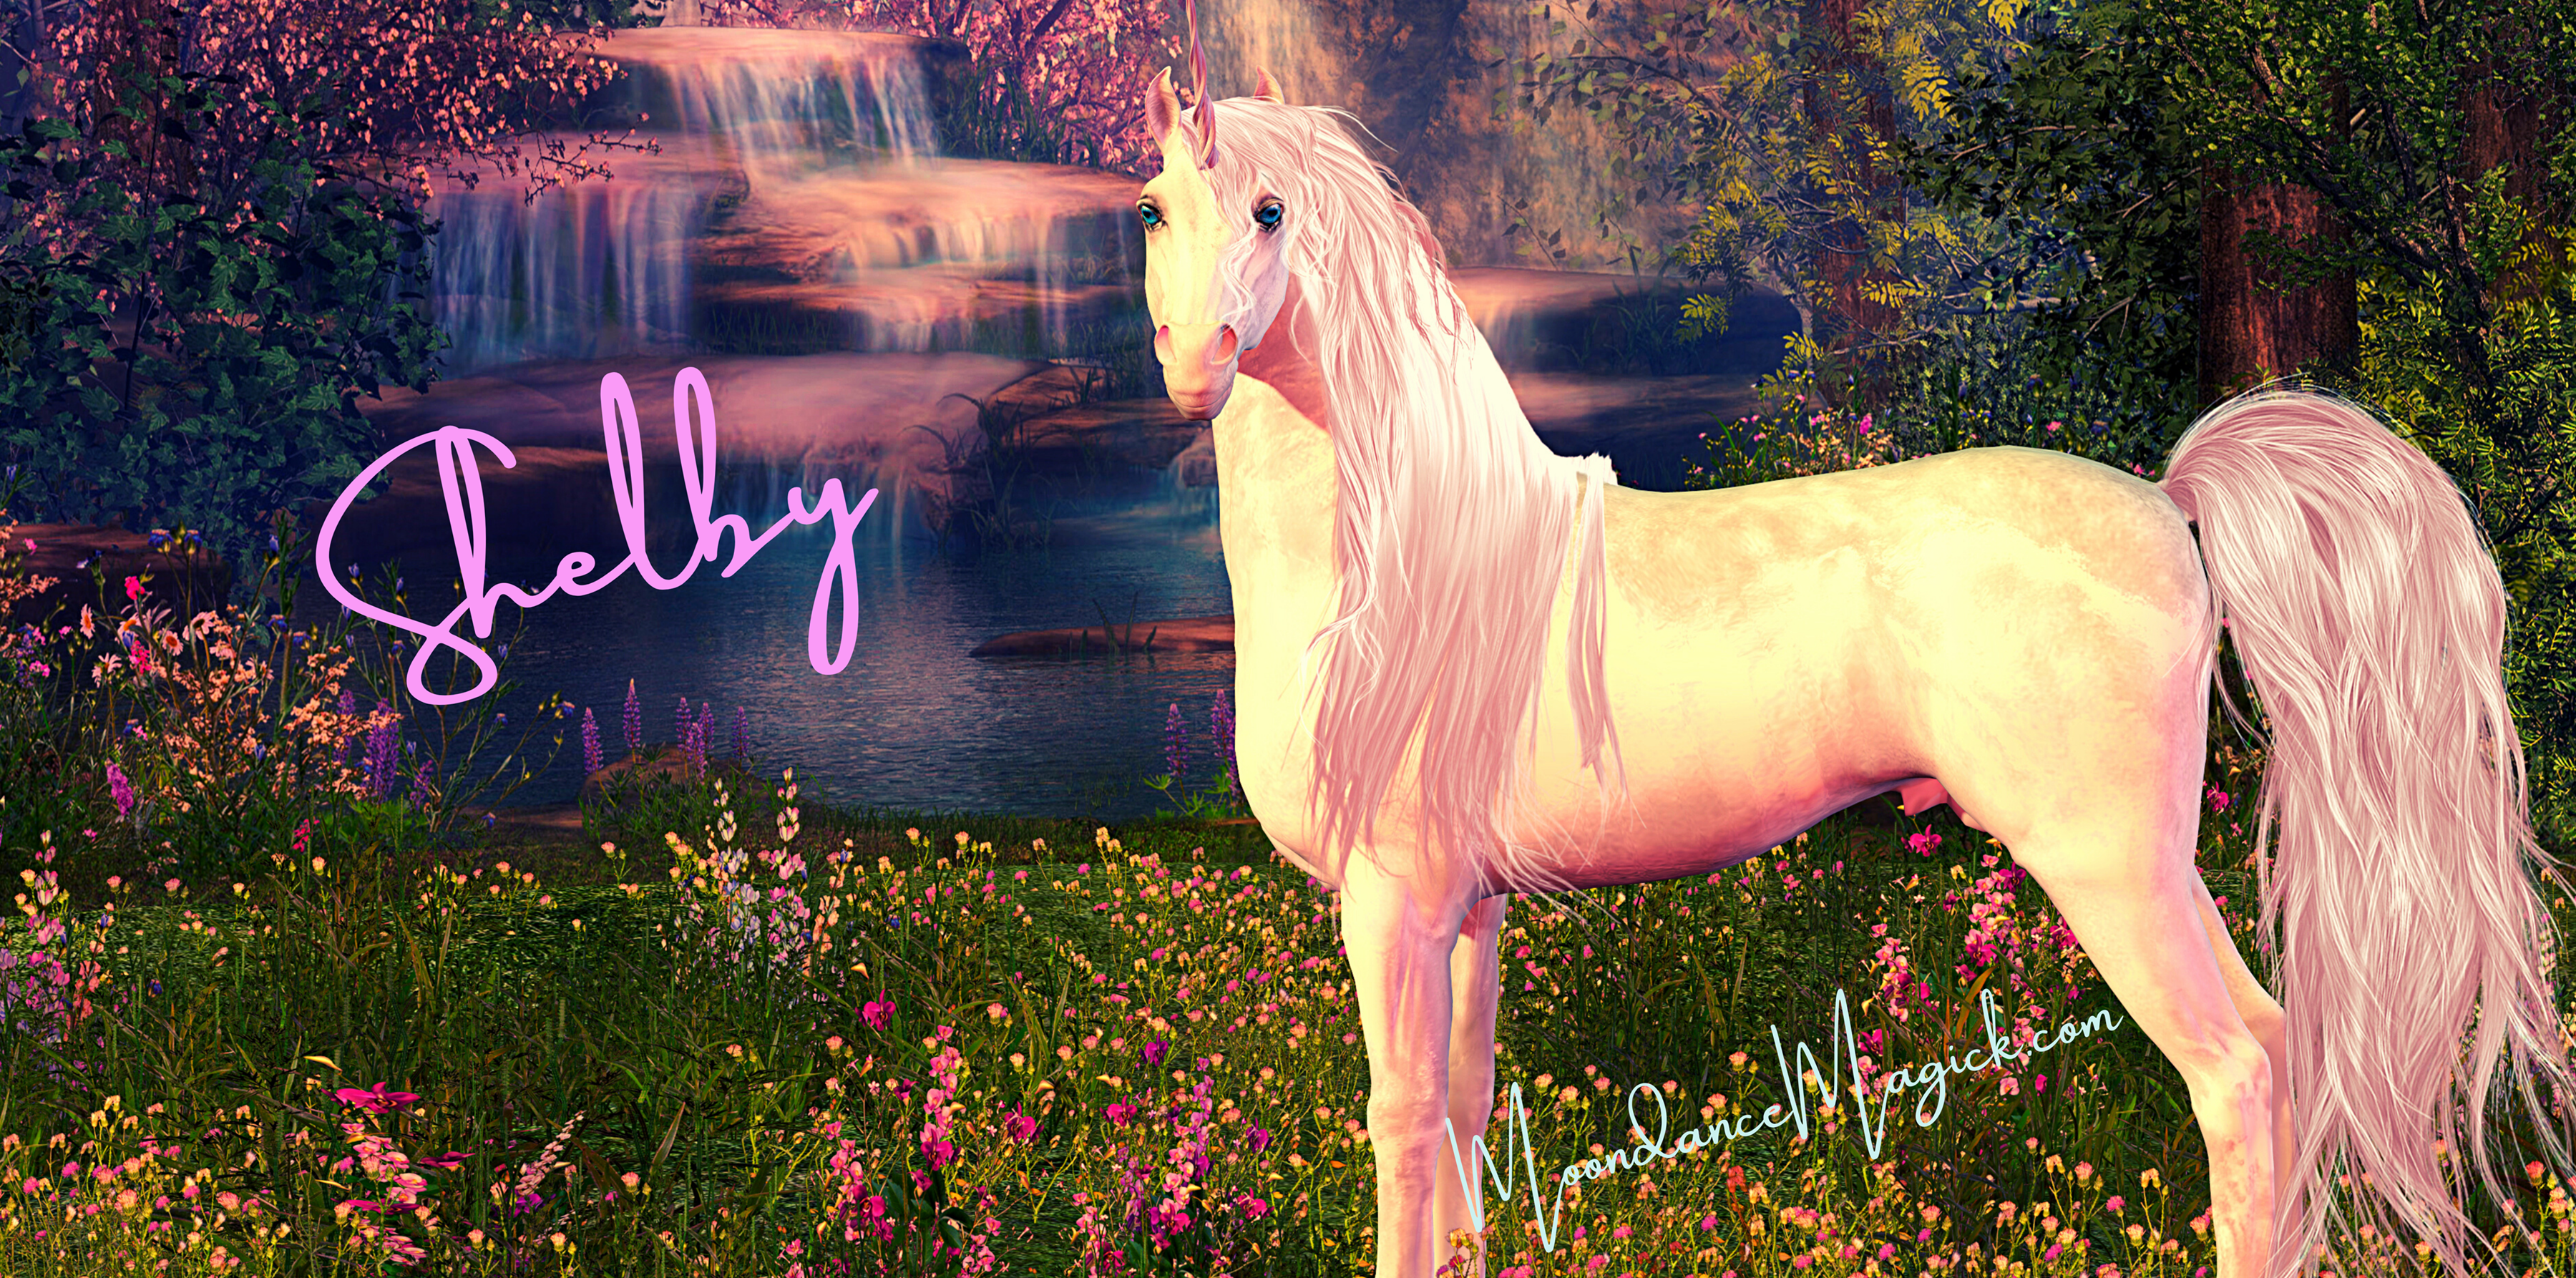 X- Adopted! - Shelby the SPECIAL Unicorn Spirit - Remote Binding - Healing and Wellness